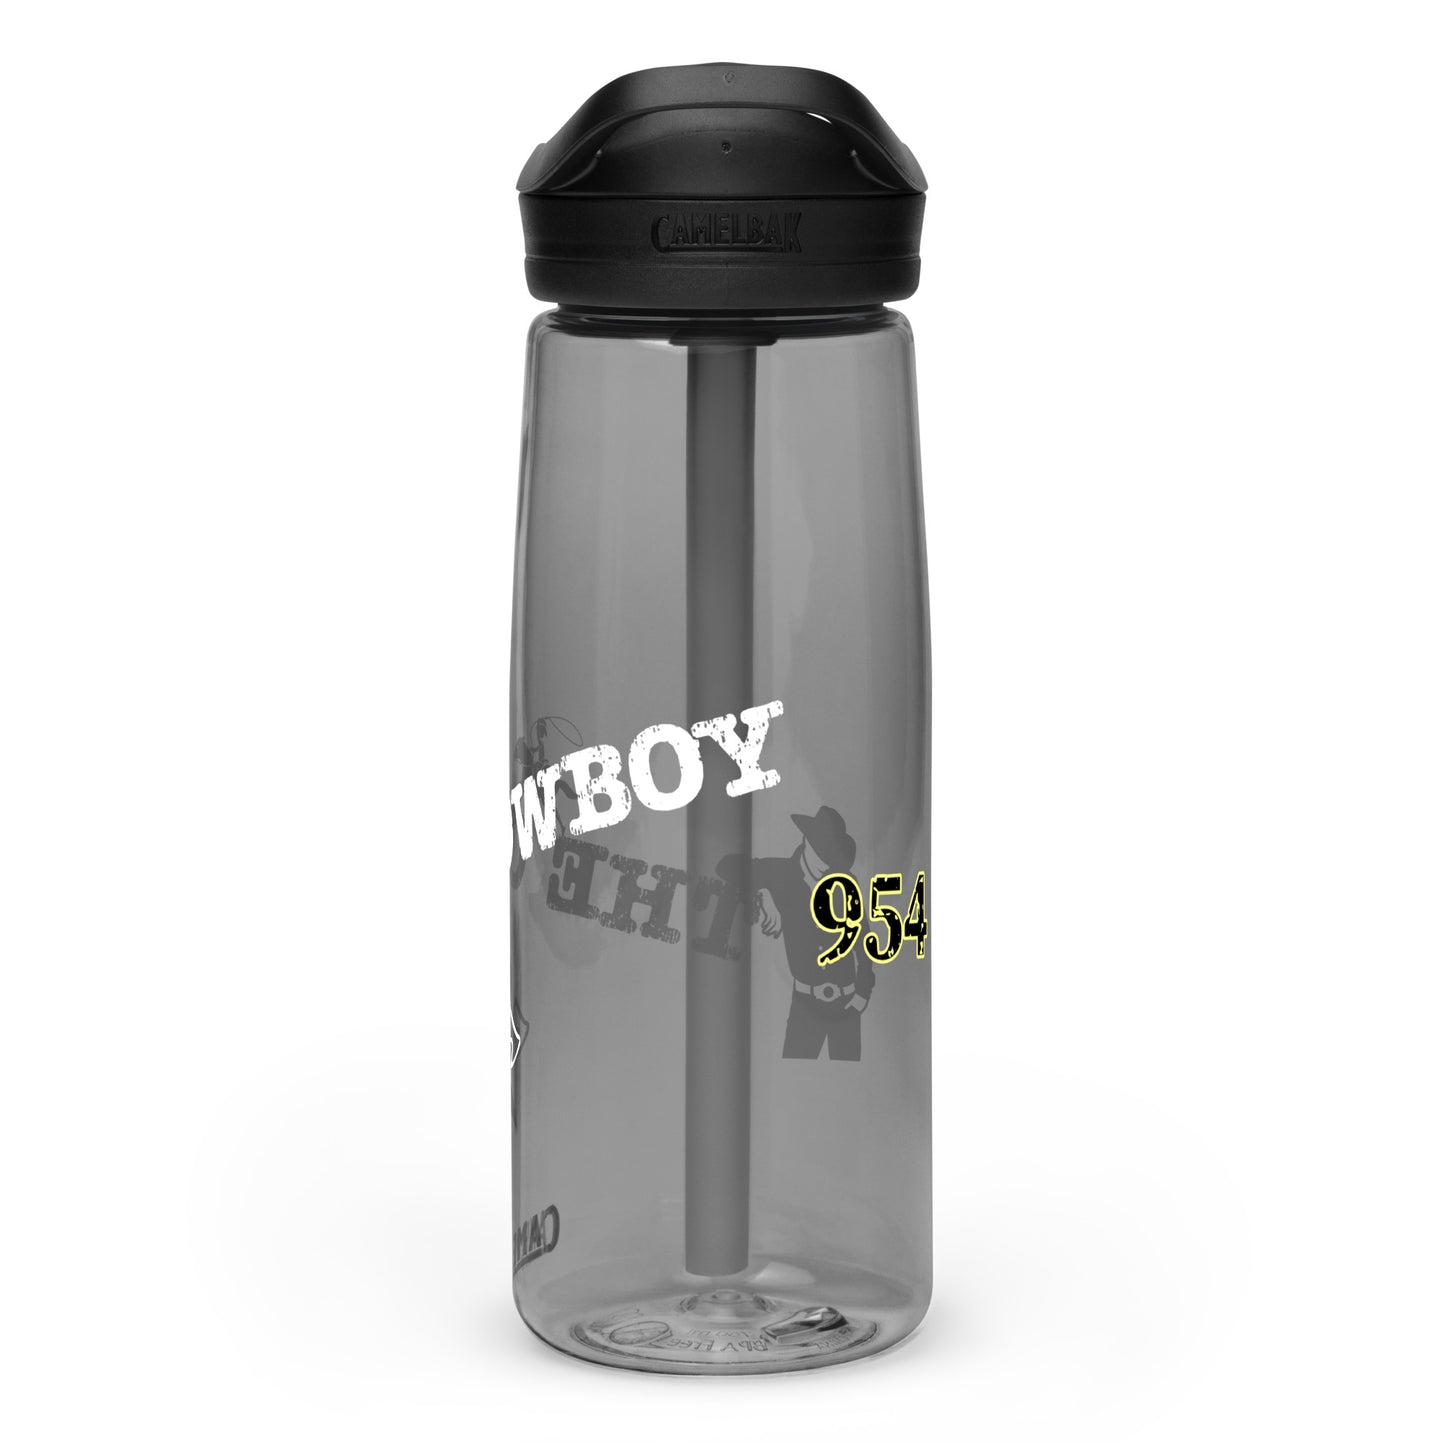 The Cowboy 954 Signature Sports water bottle